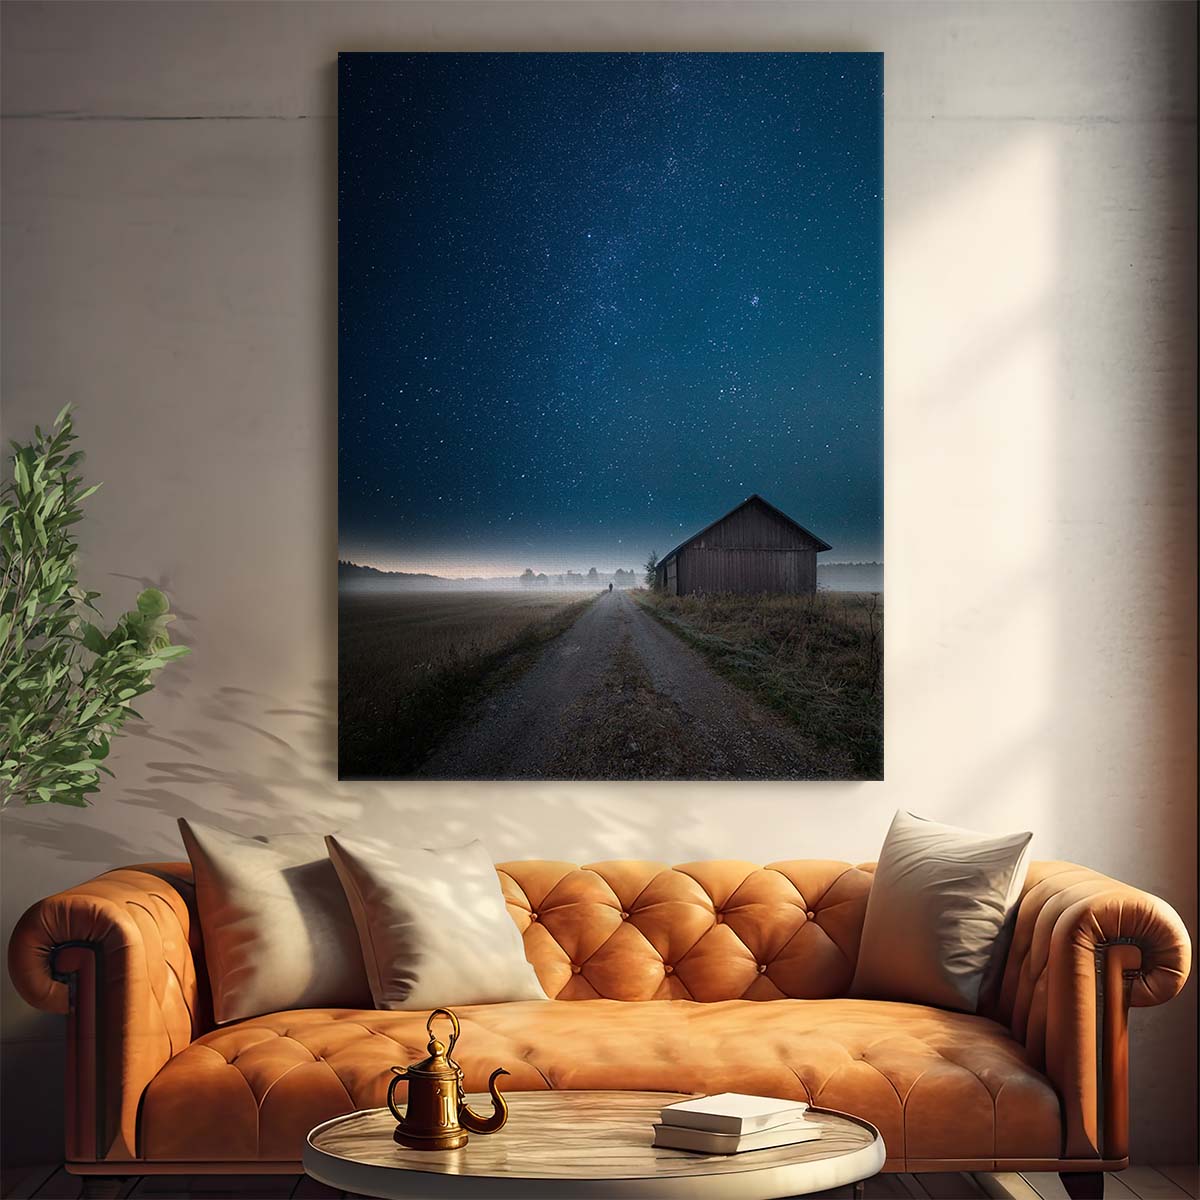 Starry Night Photography Lonely Figure Amidst Rural Landscape by Luxuriance Designs, made in USA